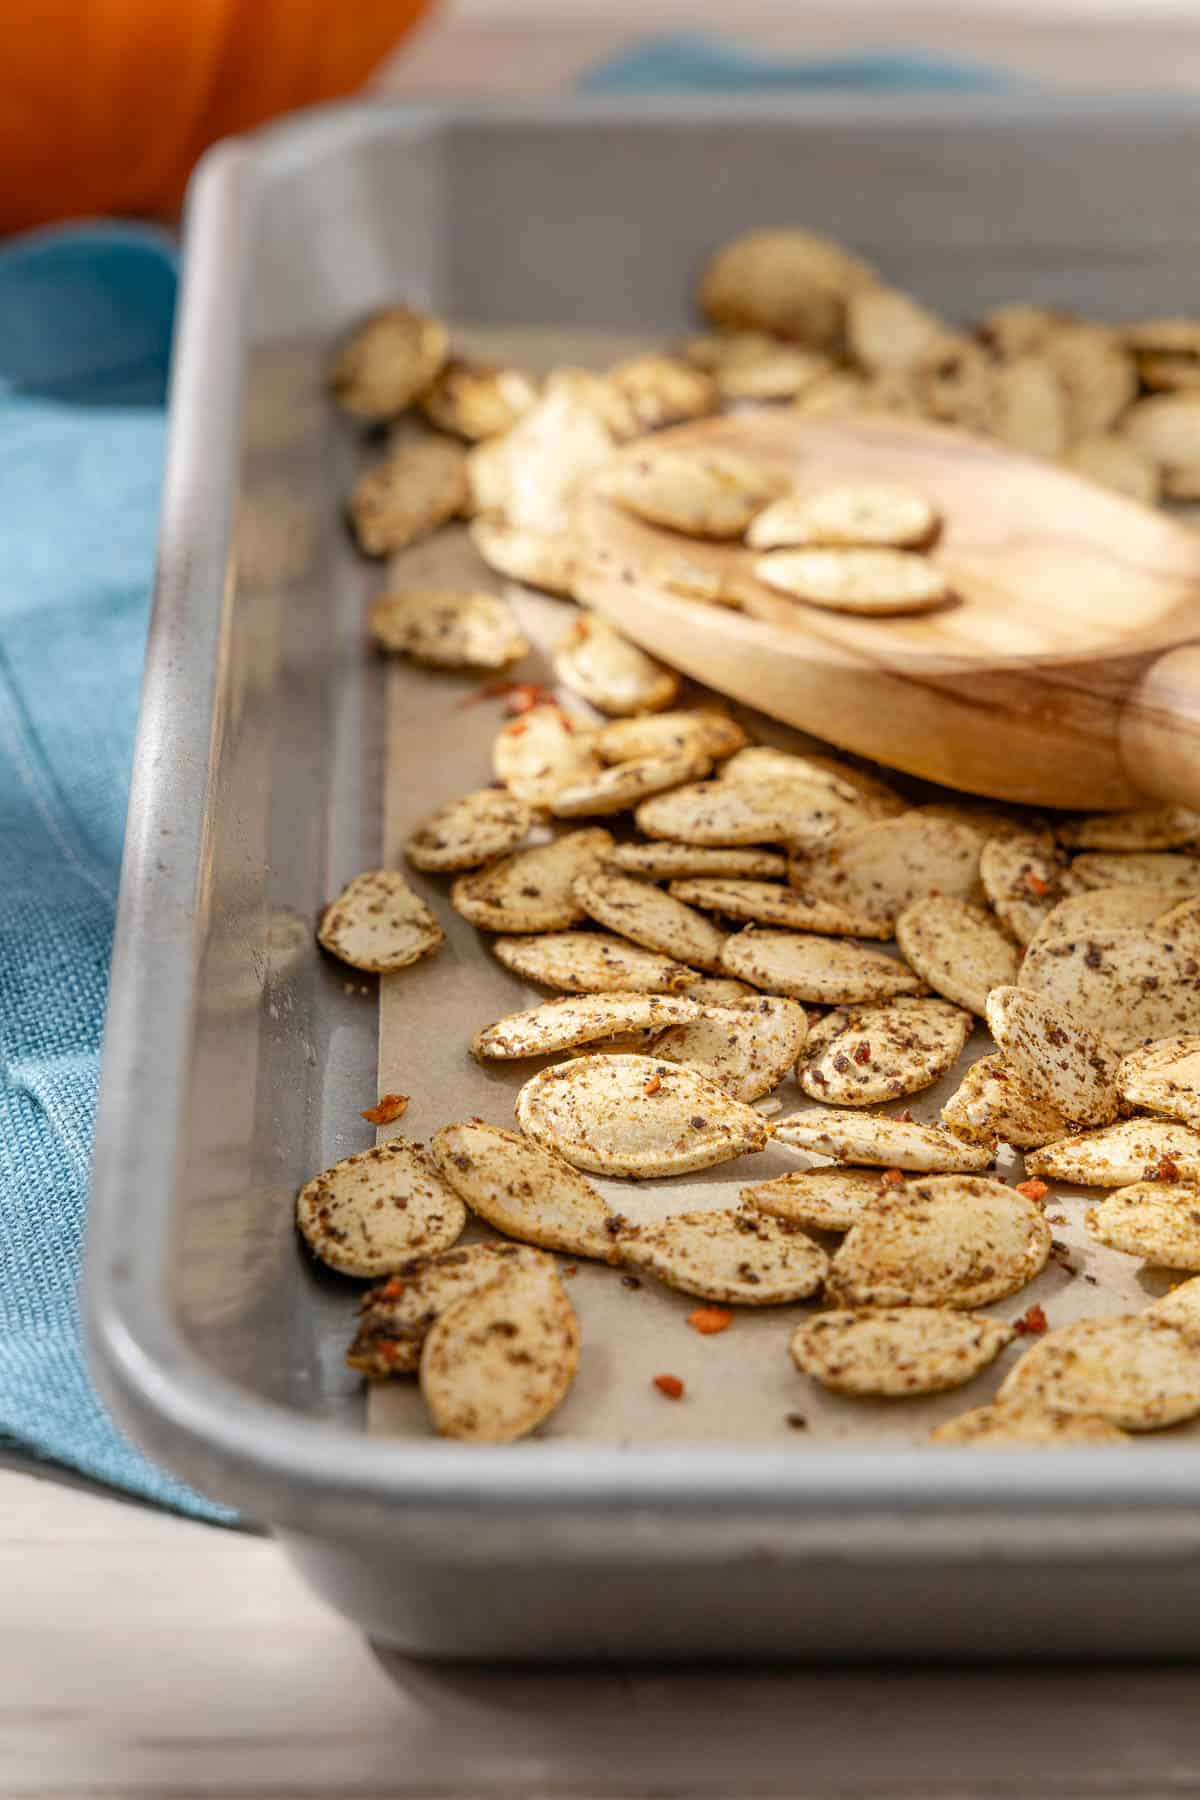 a roasted pumpkin seed recipe where there is a close-up photo of savory seasoned roasted pumpkin seeds with a wooden serving spoon on a parchment-lined sheet pan.